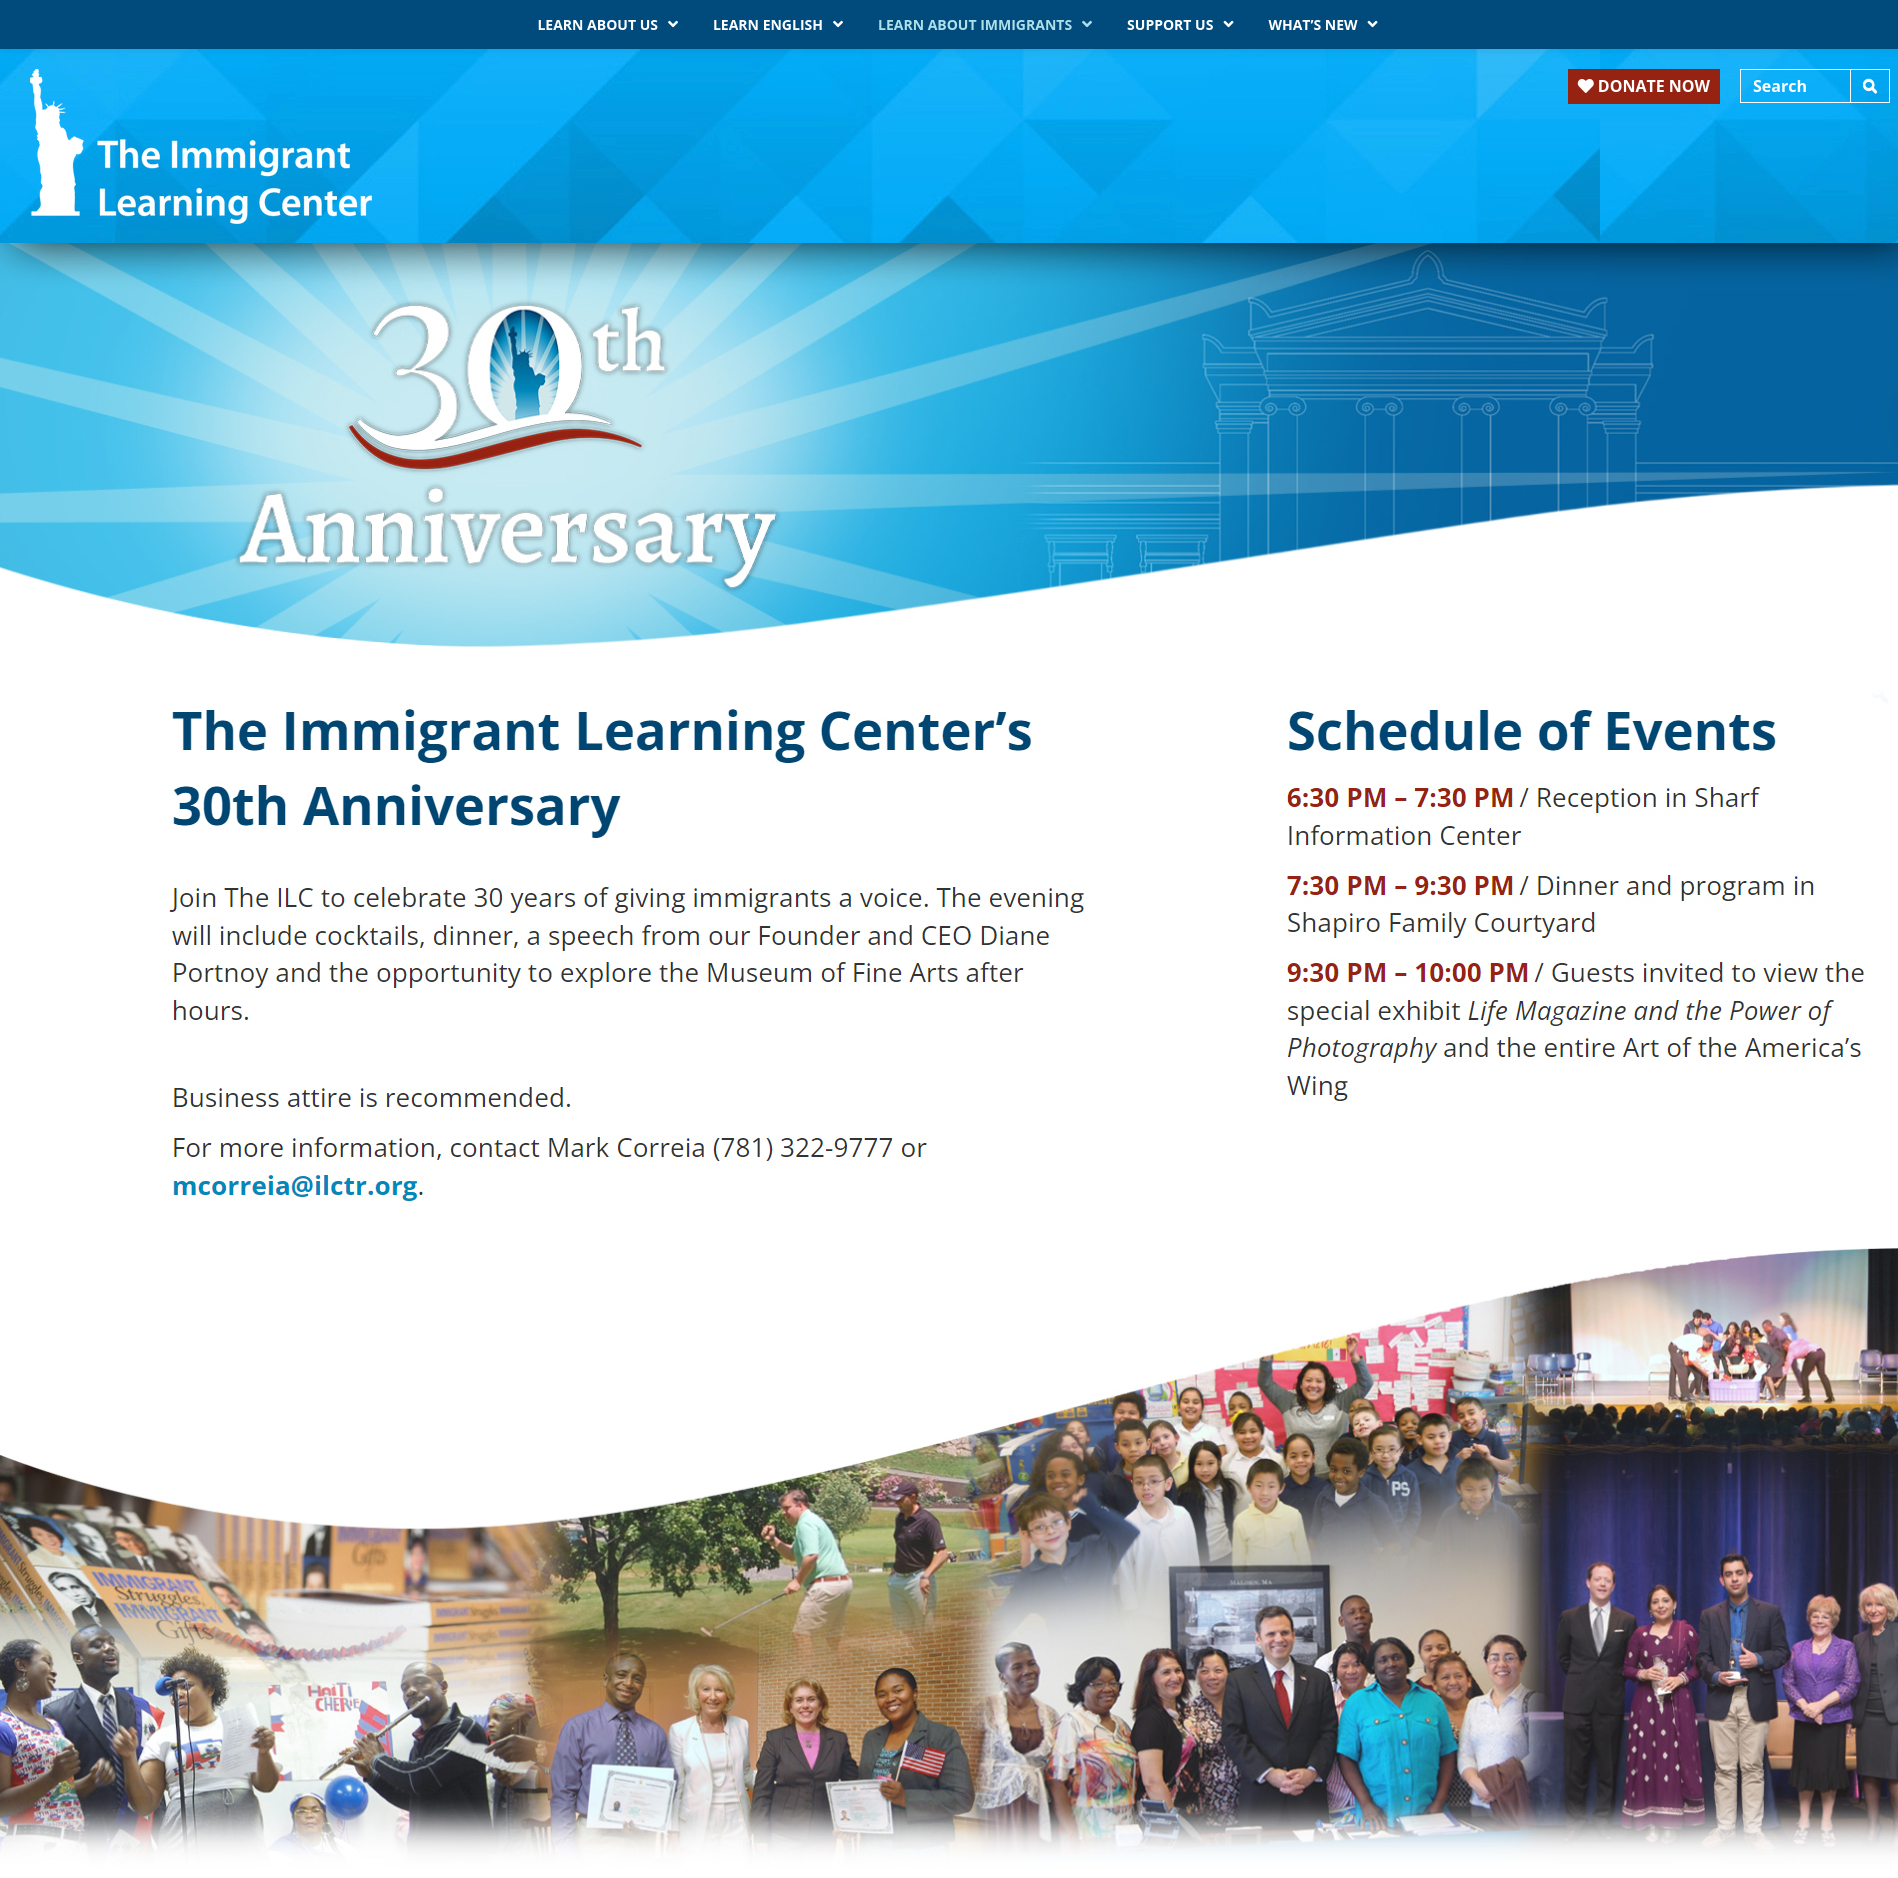 Webpage for The Immigrant Learning Center's 30th Anniversary Gala.